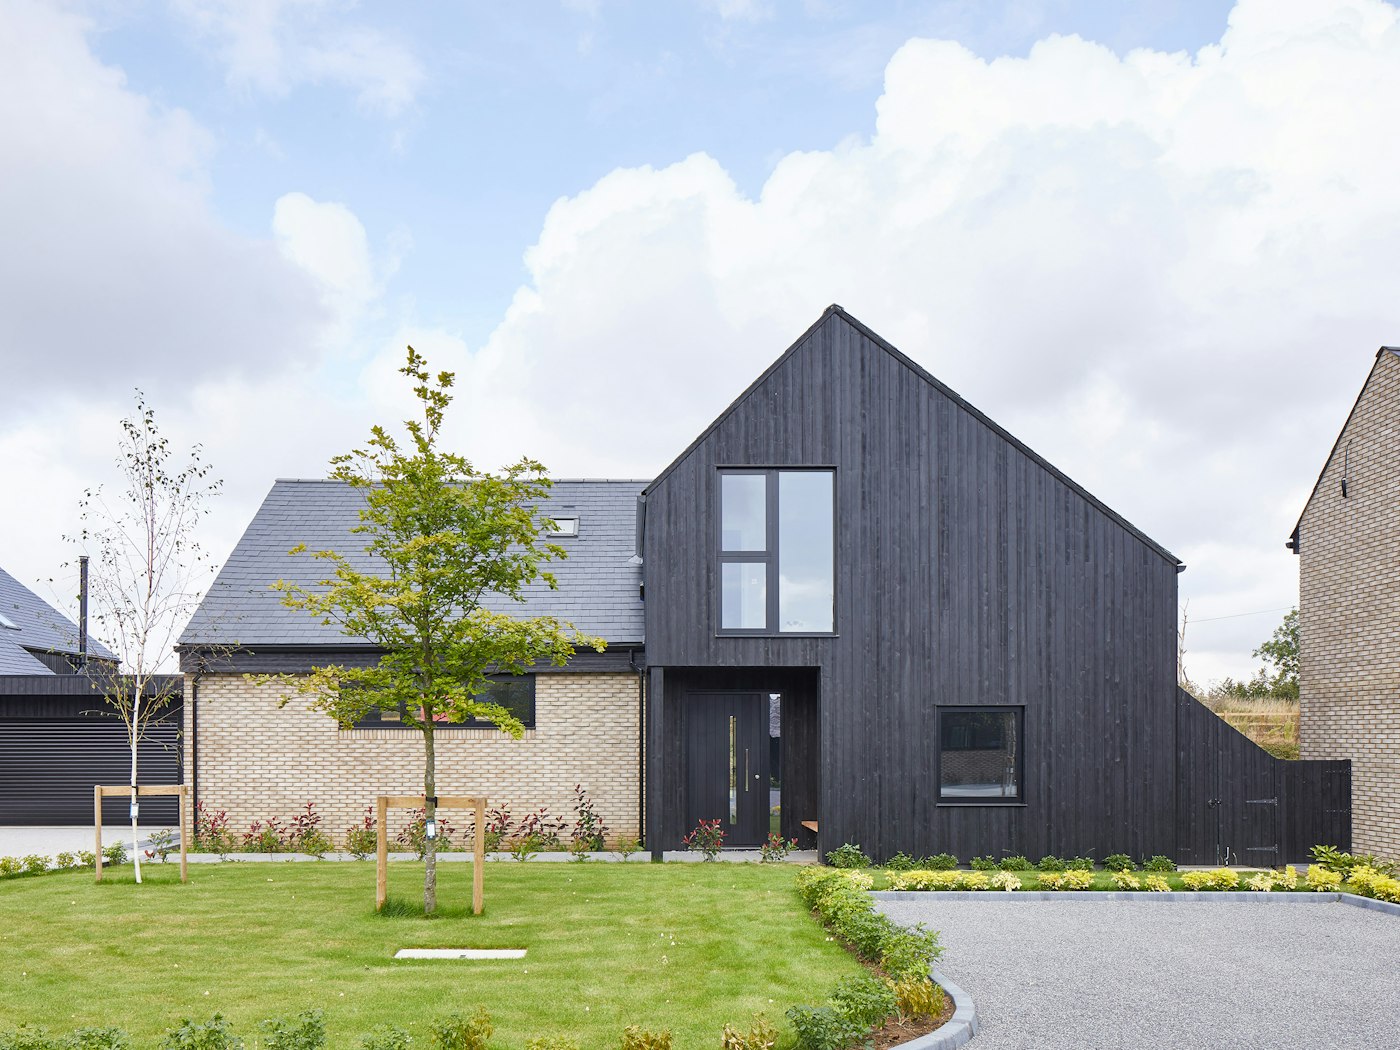 And while this house uses mixed materials, the entrance is dominated by the charred cladding and matching door